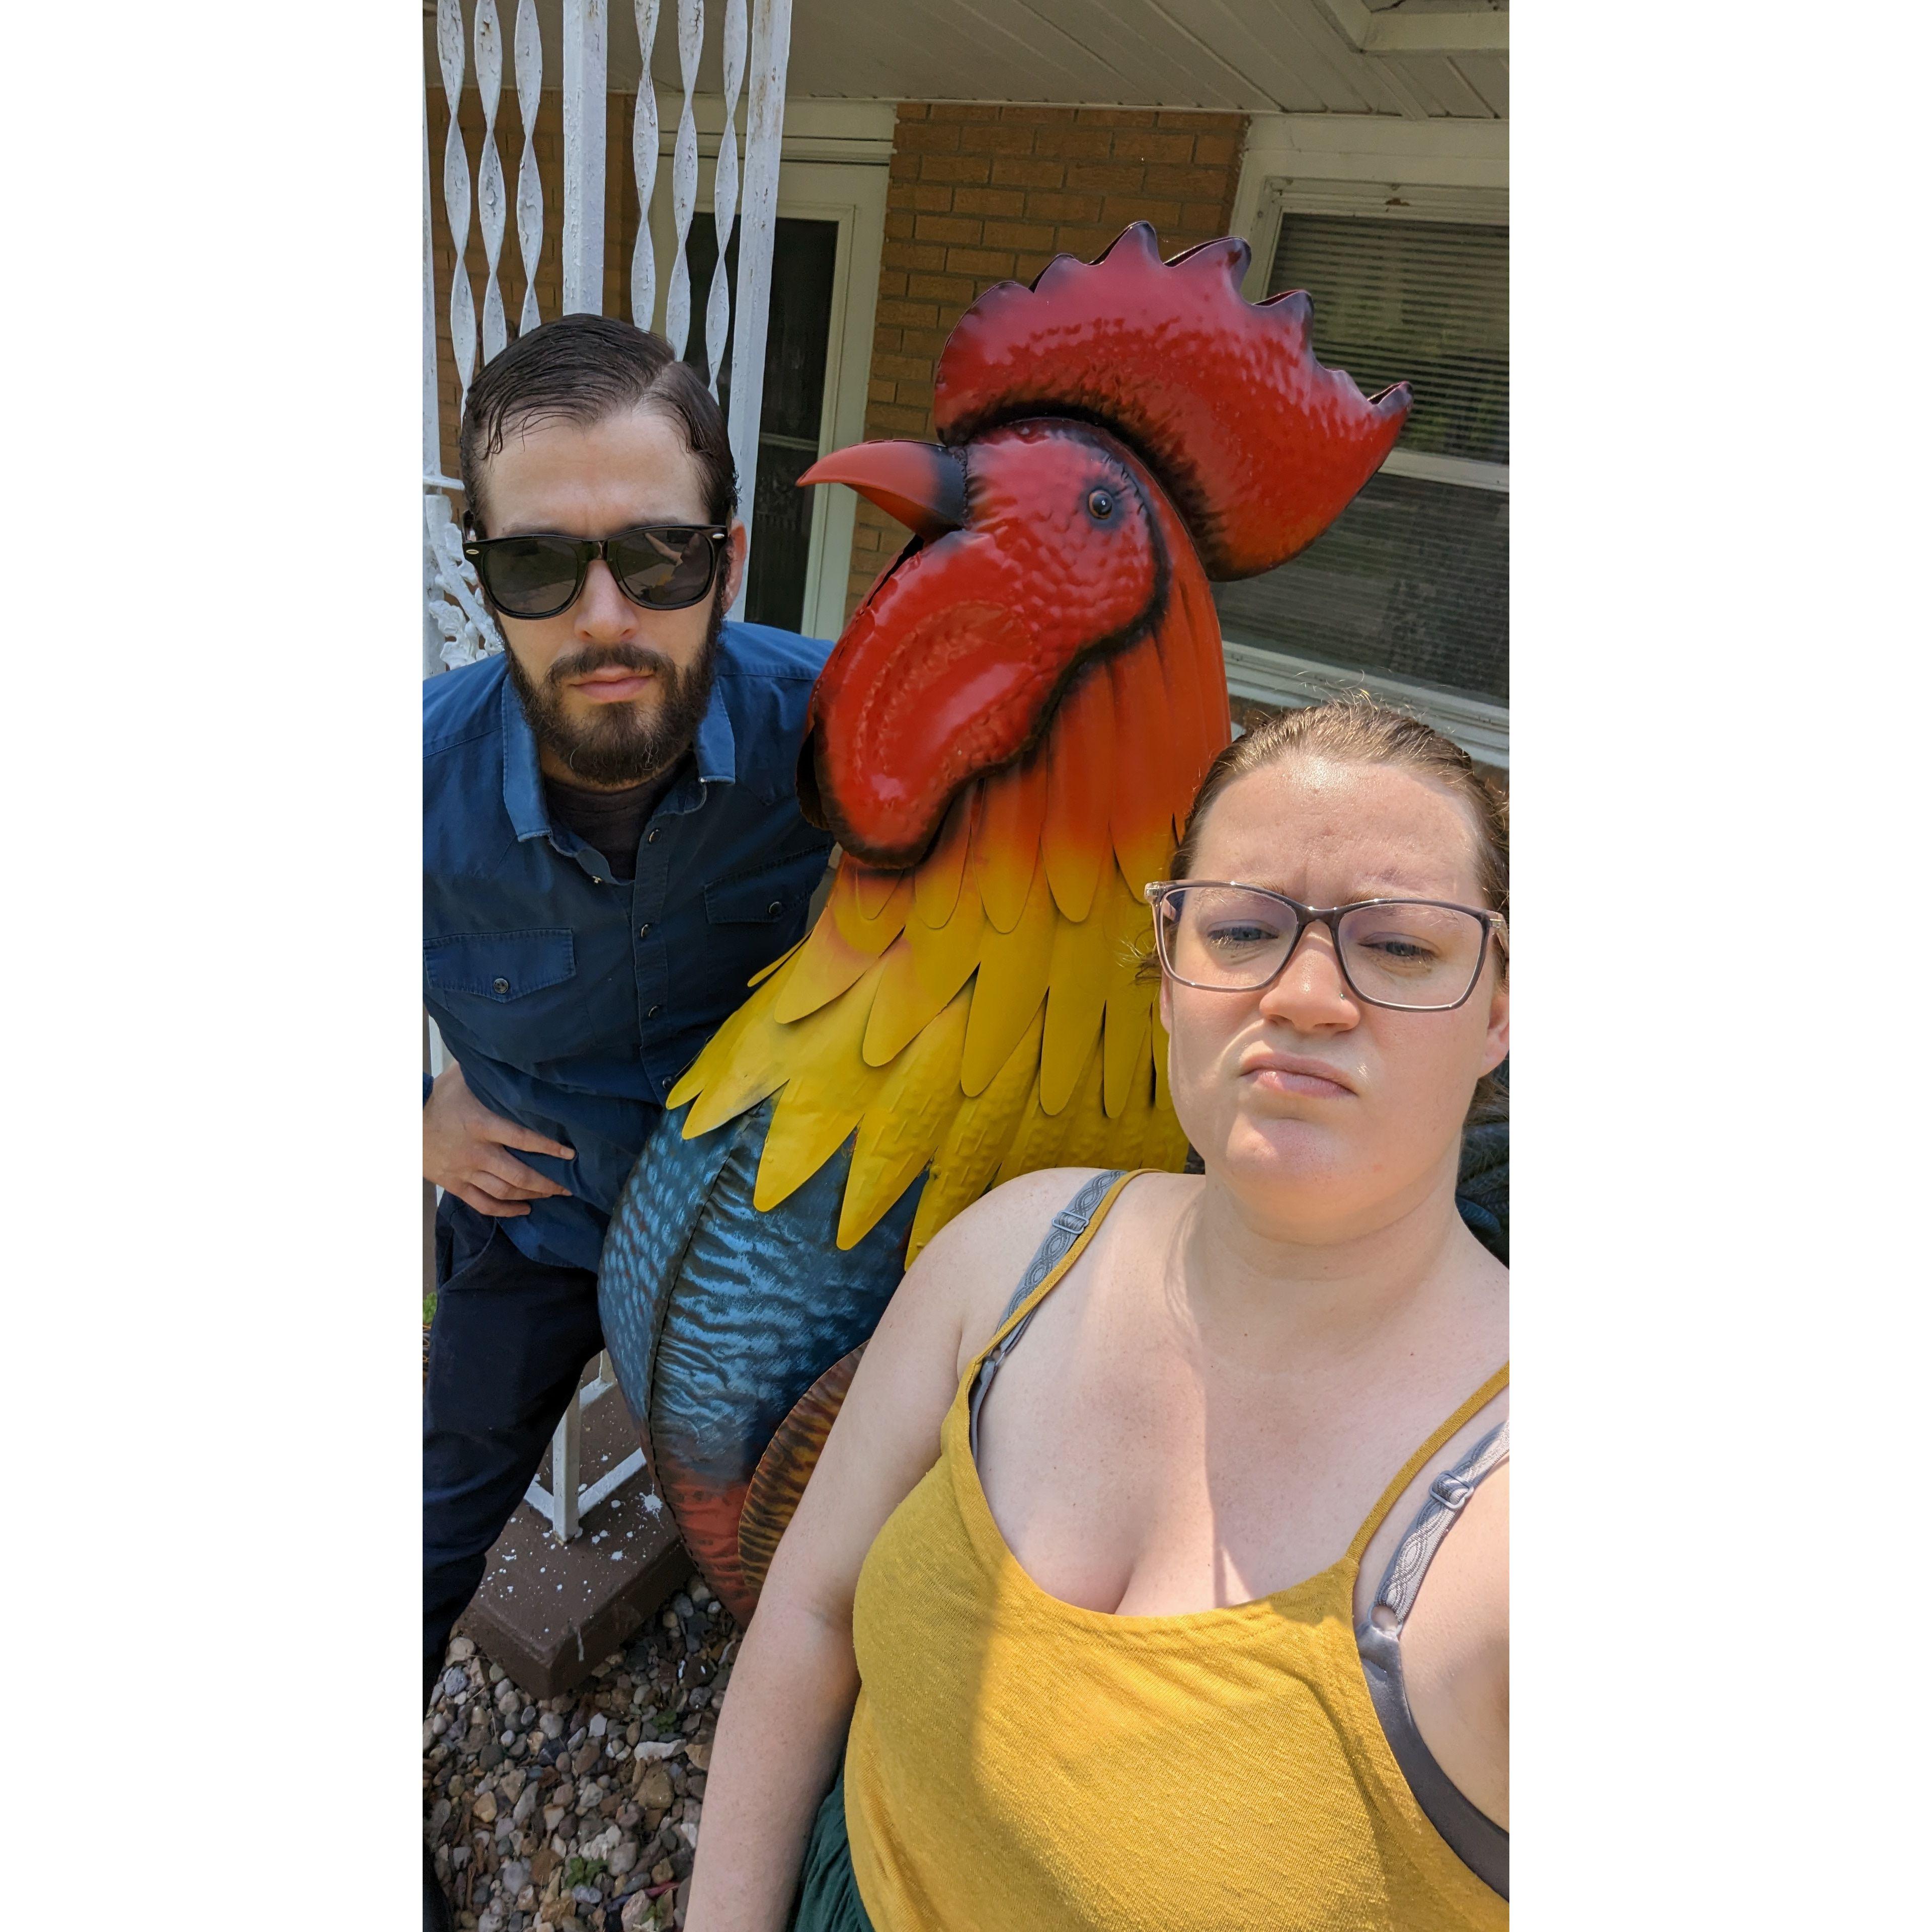 Giant rooster shenanigans